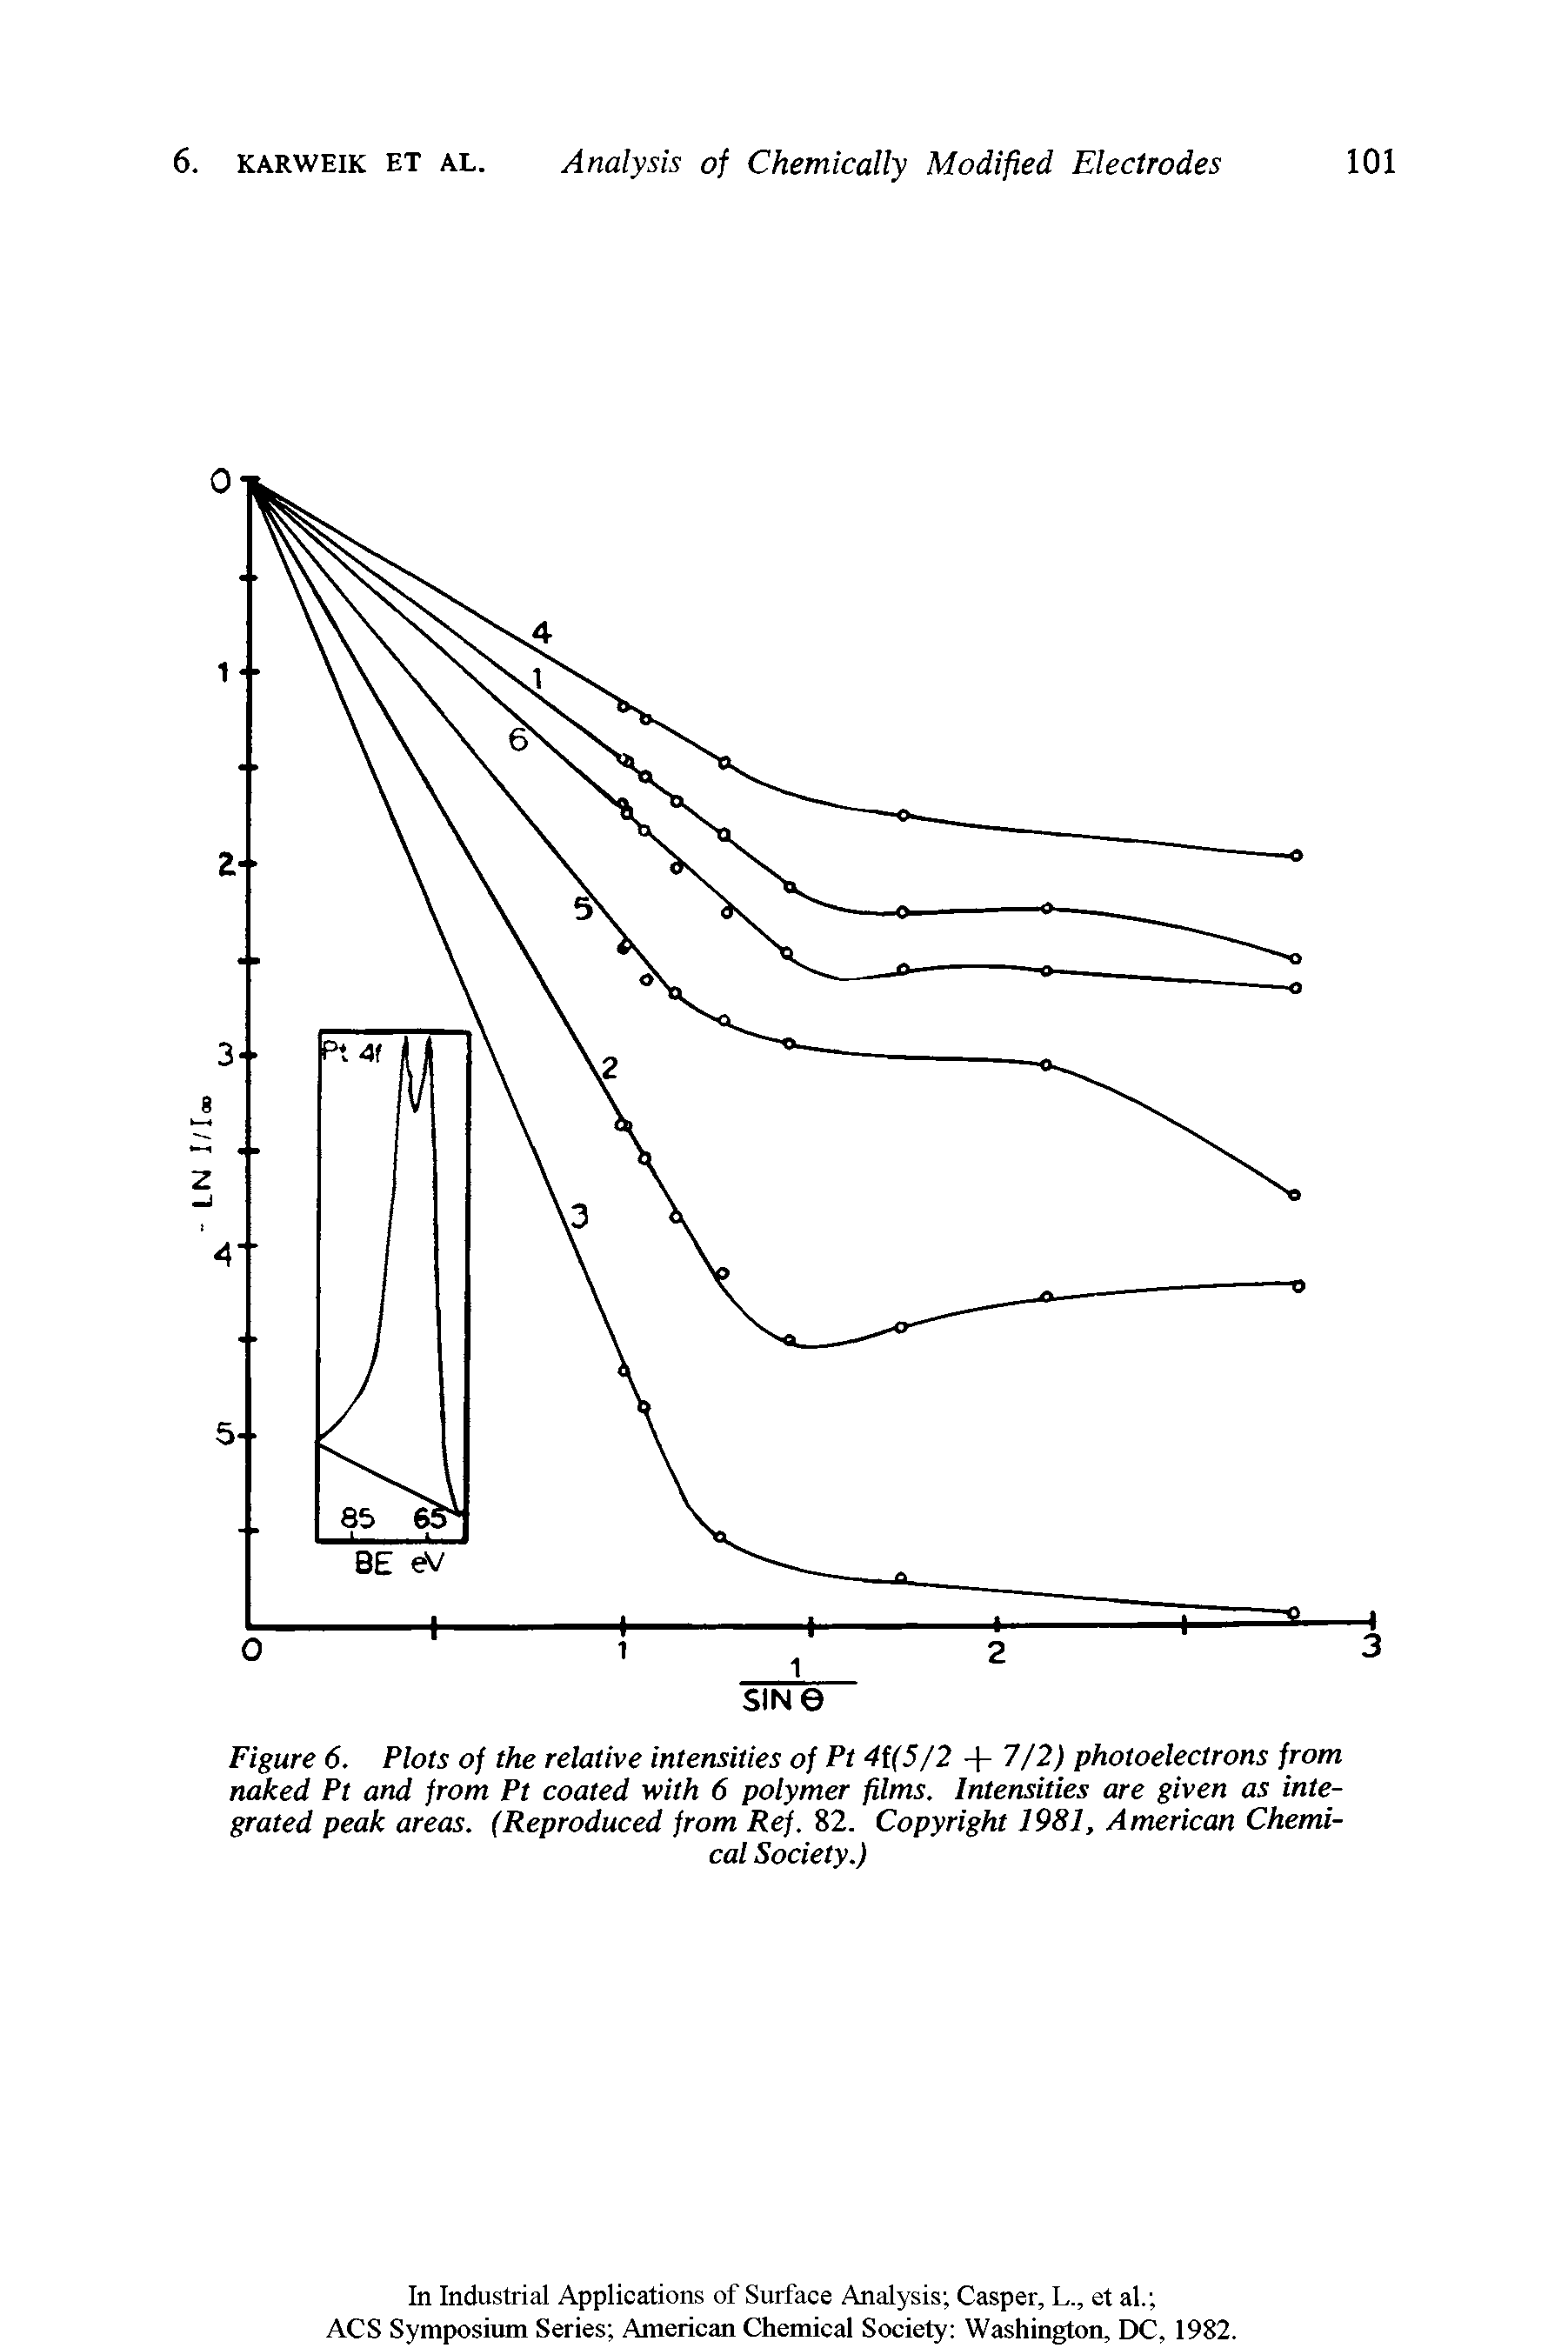 Figure 6. Plots of the relative intensities of Pt 4i(5/2 + 7/2) photoelectrons from naked Pt and from Pt coated with 6 polymer films. Intensities are given as integrated peak areas. (Reproduced from Ref. 82. Copyright 1981, American Chemical Society.)...